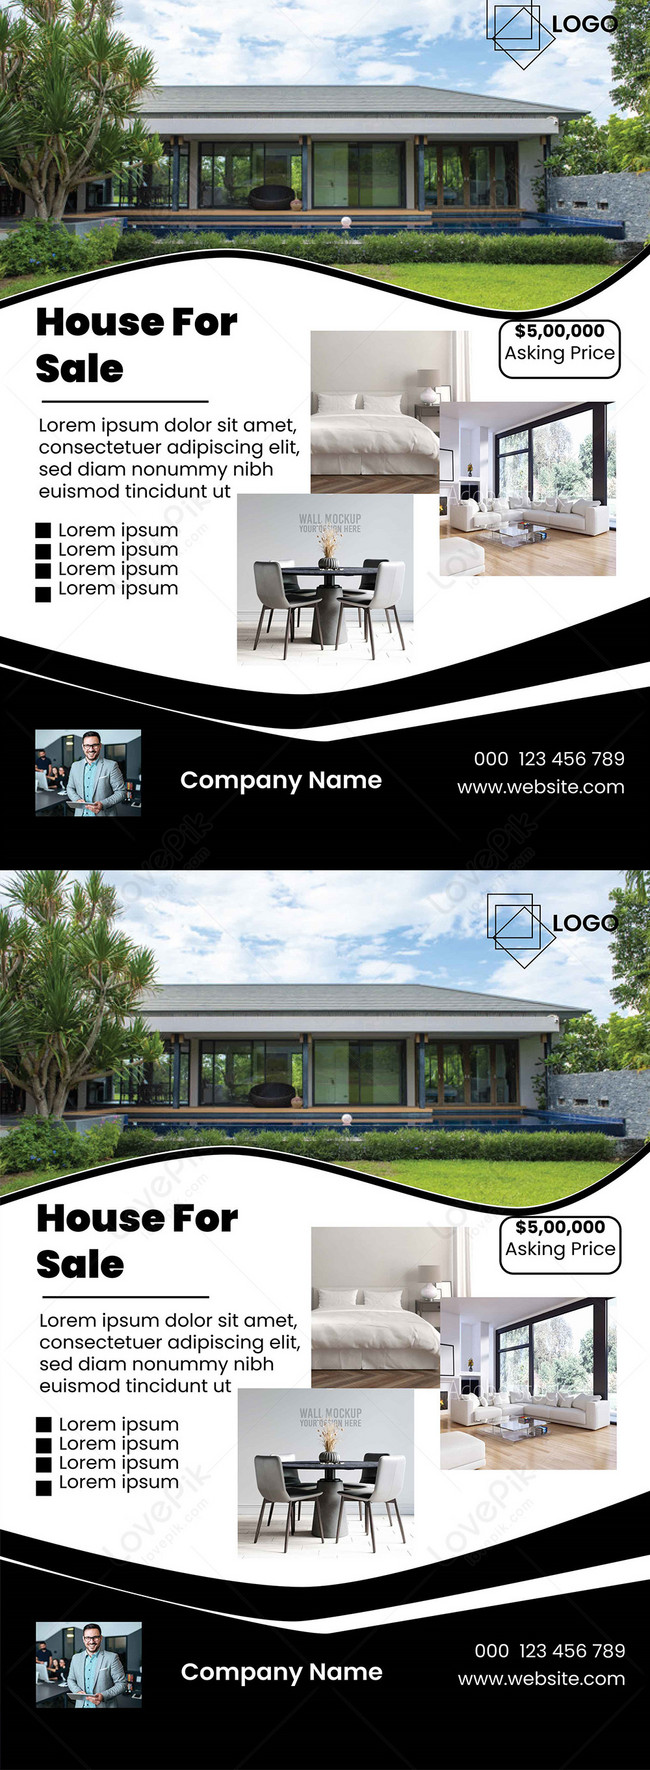 Outstanding house for sale flyer template image_picture free Regarding House For Sale Flyer Template